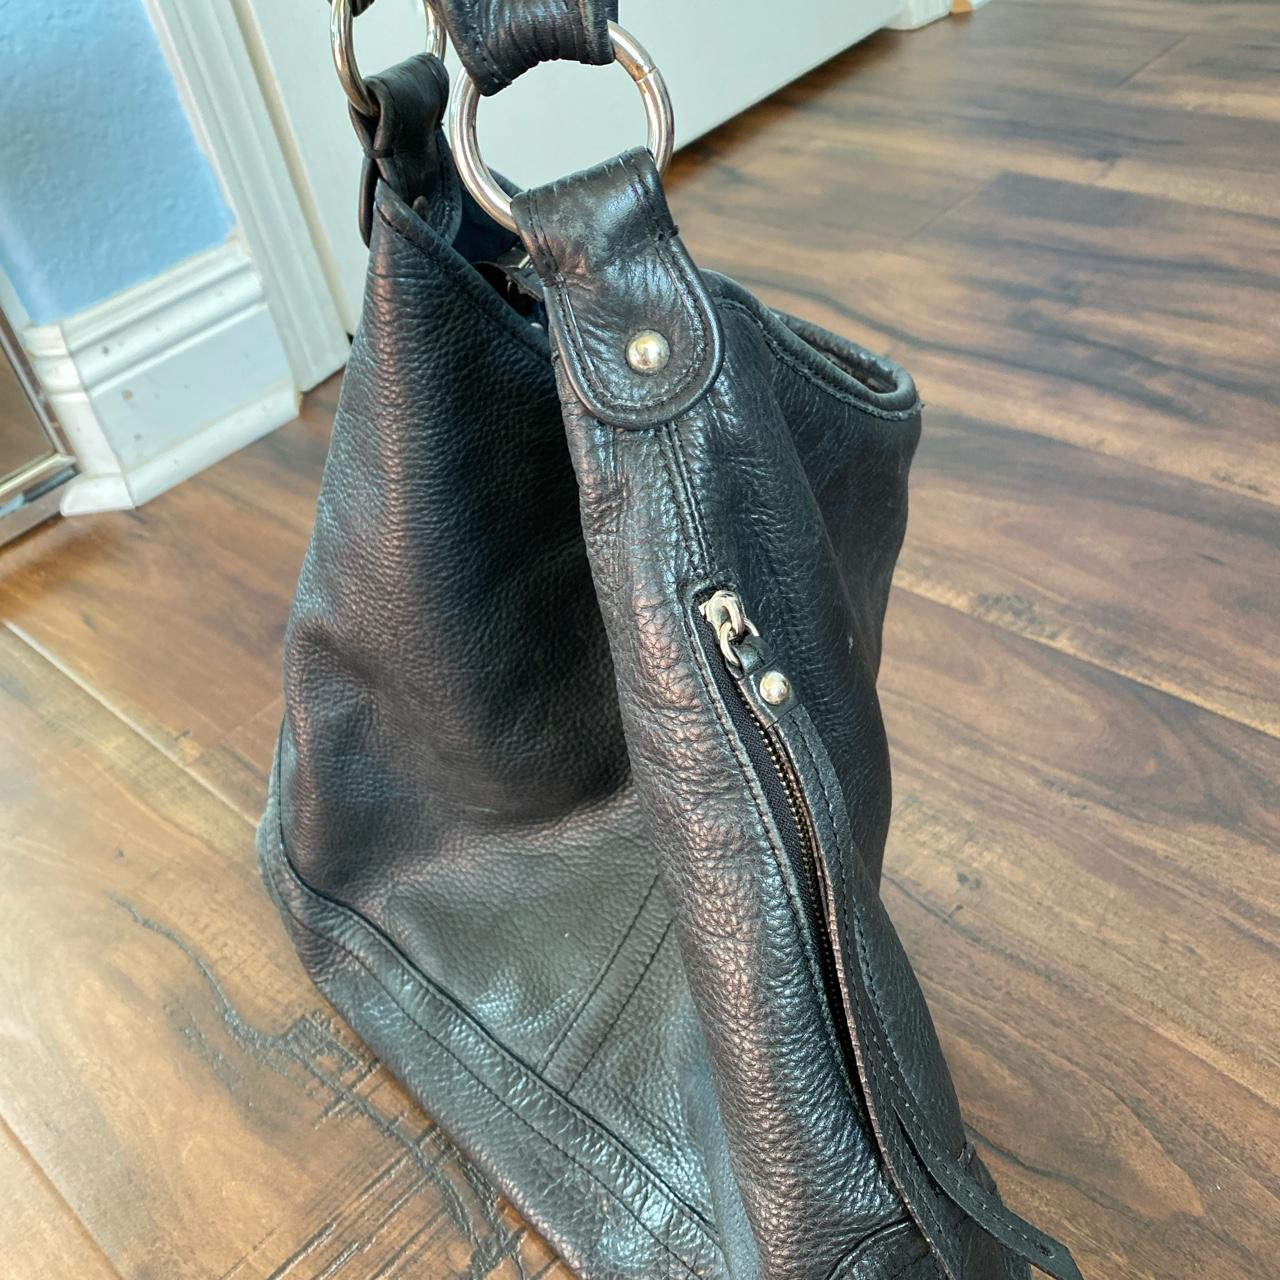 ISO: The Row Slouchy Banana Bag in black leather. - Depop